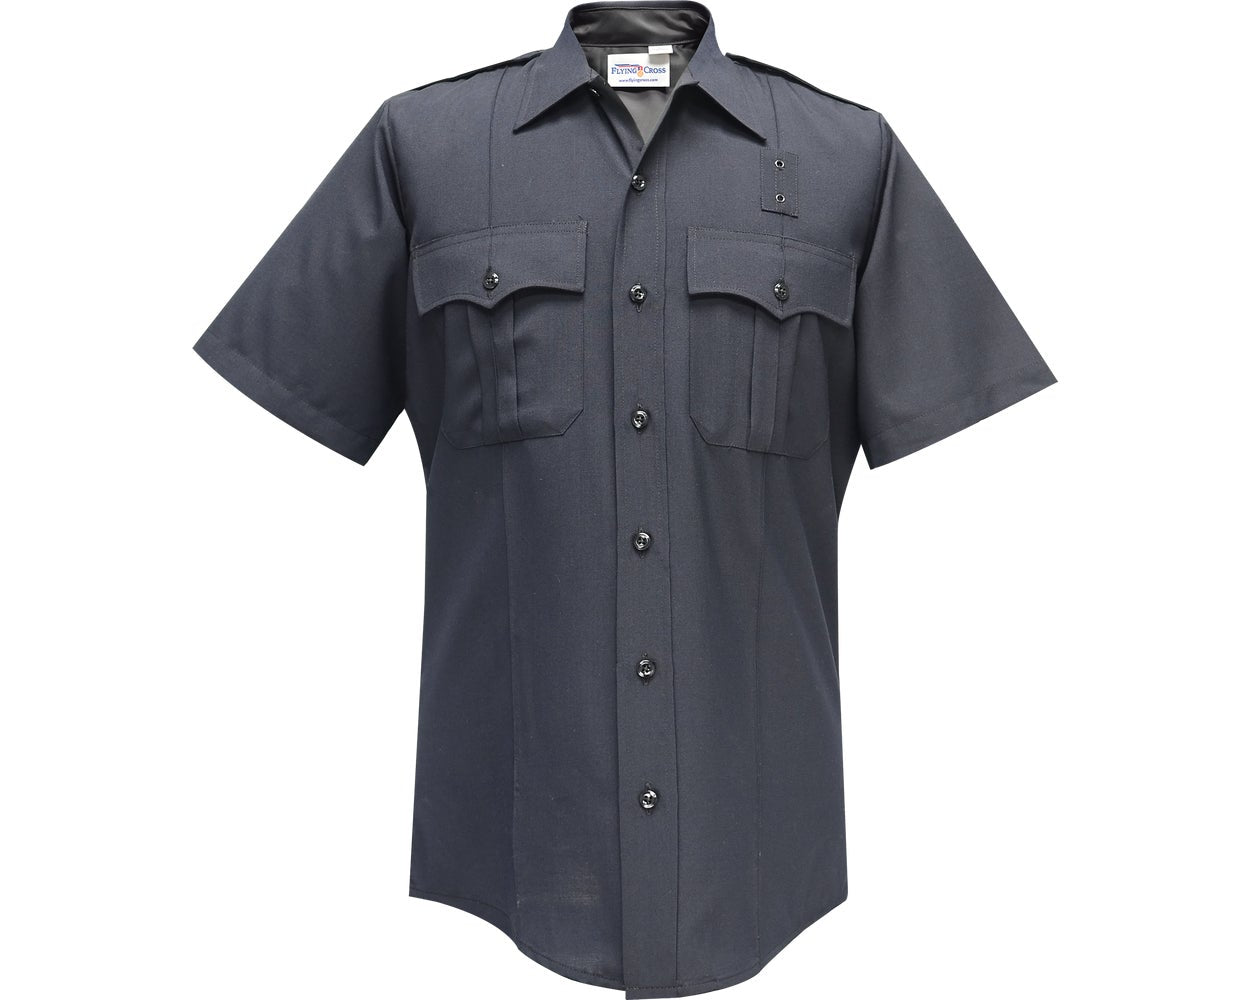 Flying Cross Justice 75% Poly/25% Wool Short Sleeve Uniform Shirt with Zipper - LAPD Navy 57R84Z - Newest Products